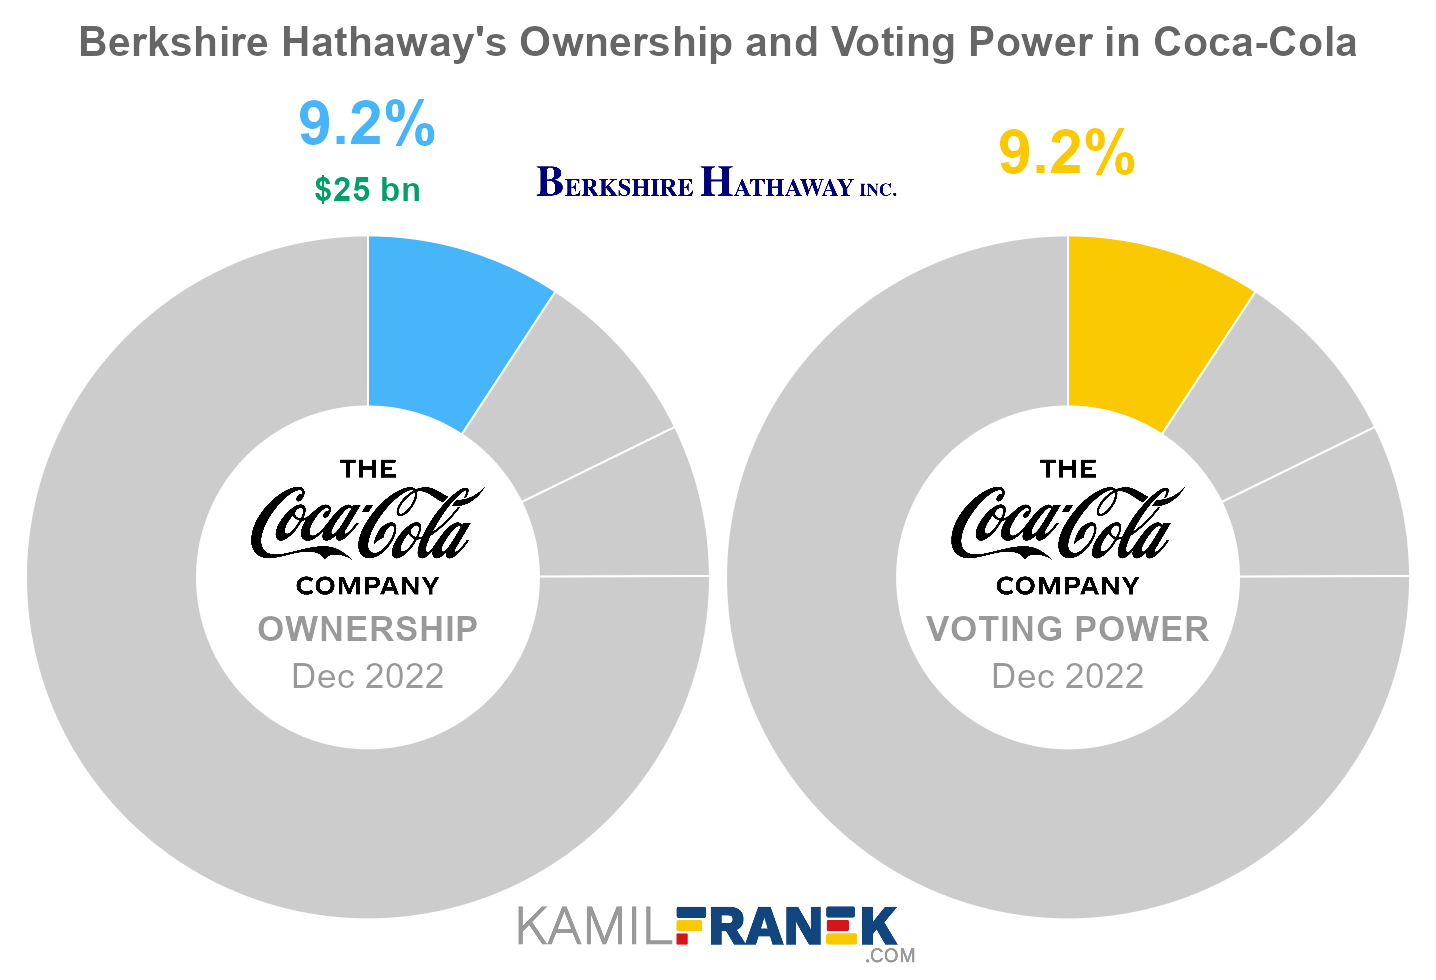 Coca-Cola largest shareholders share ownership vs vote control chart